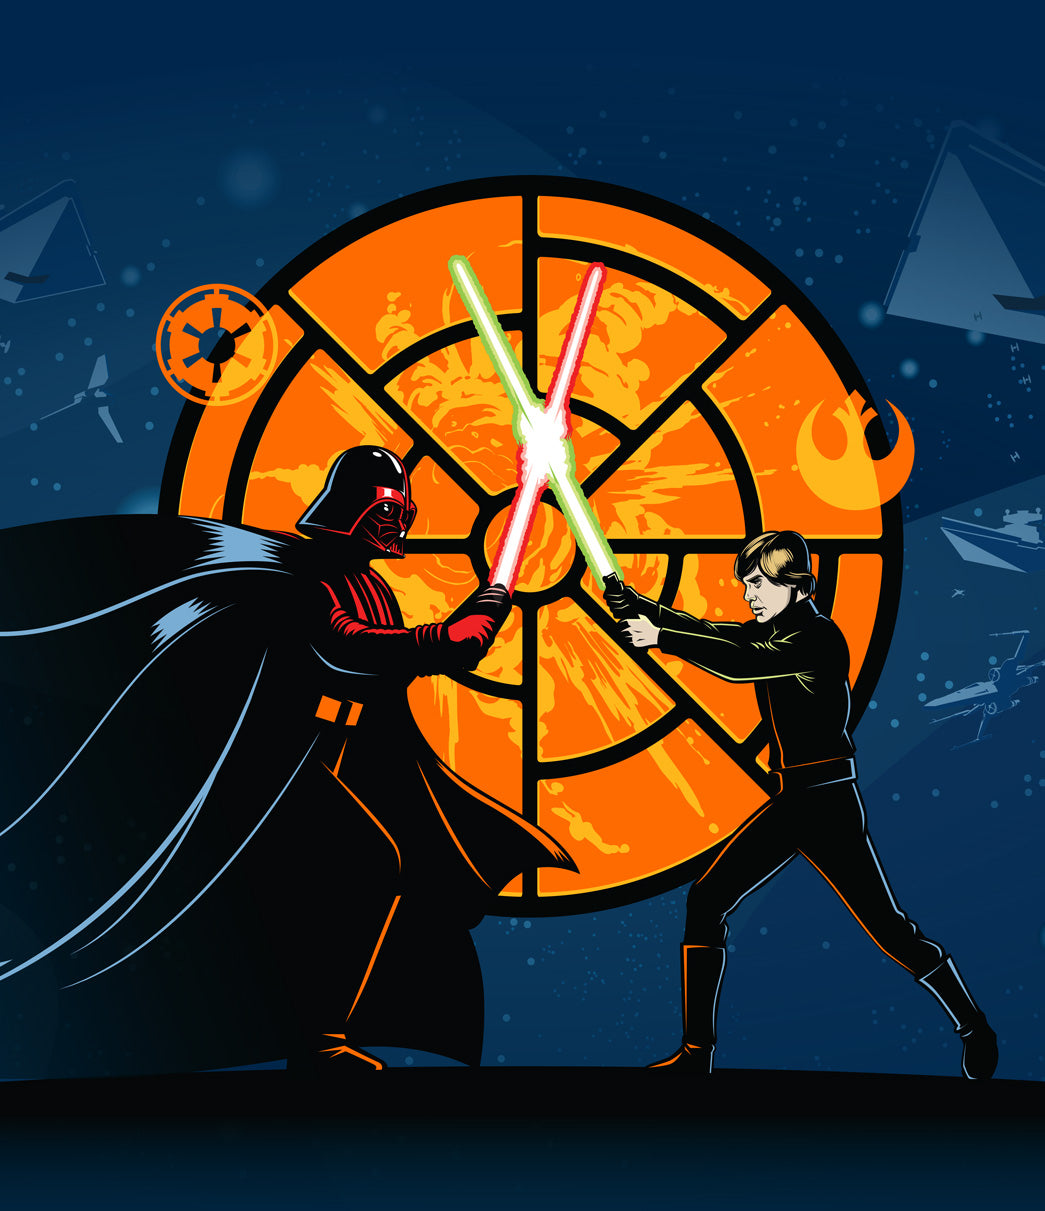 Duel of the Death Star